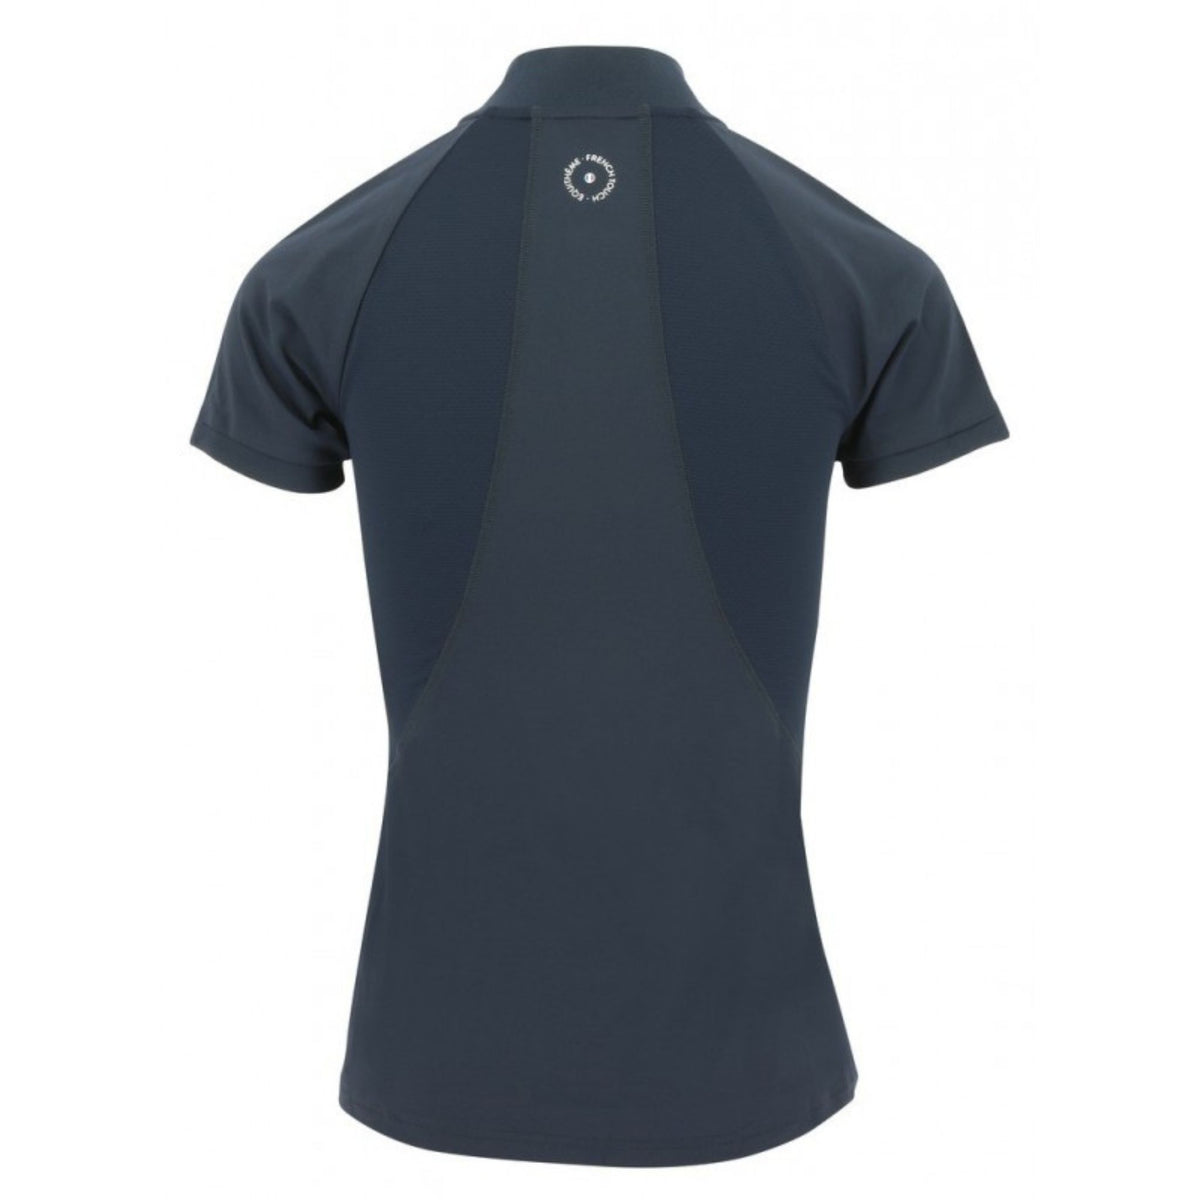 Back of the navy polo with mesh panels and Equitheme logo